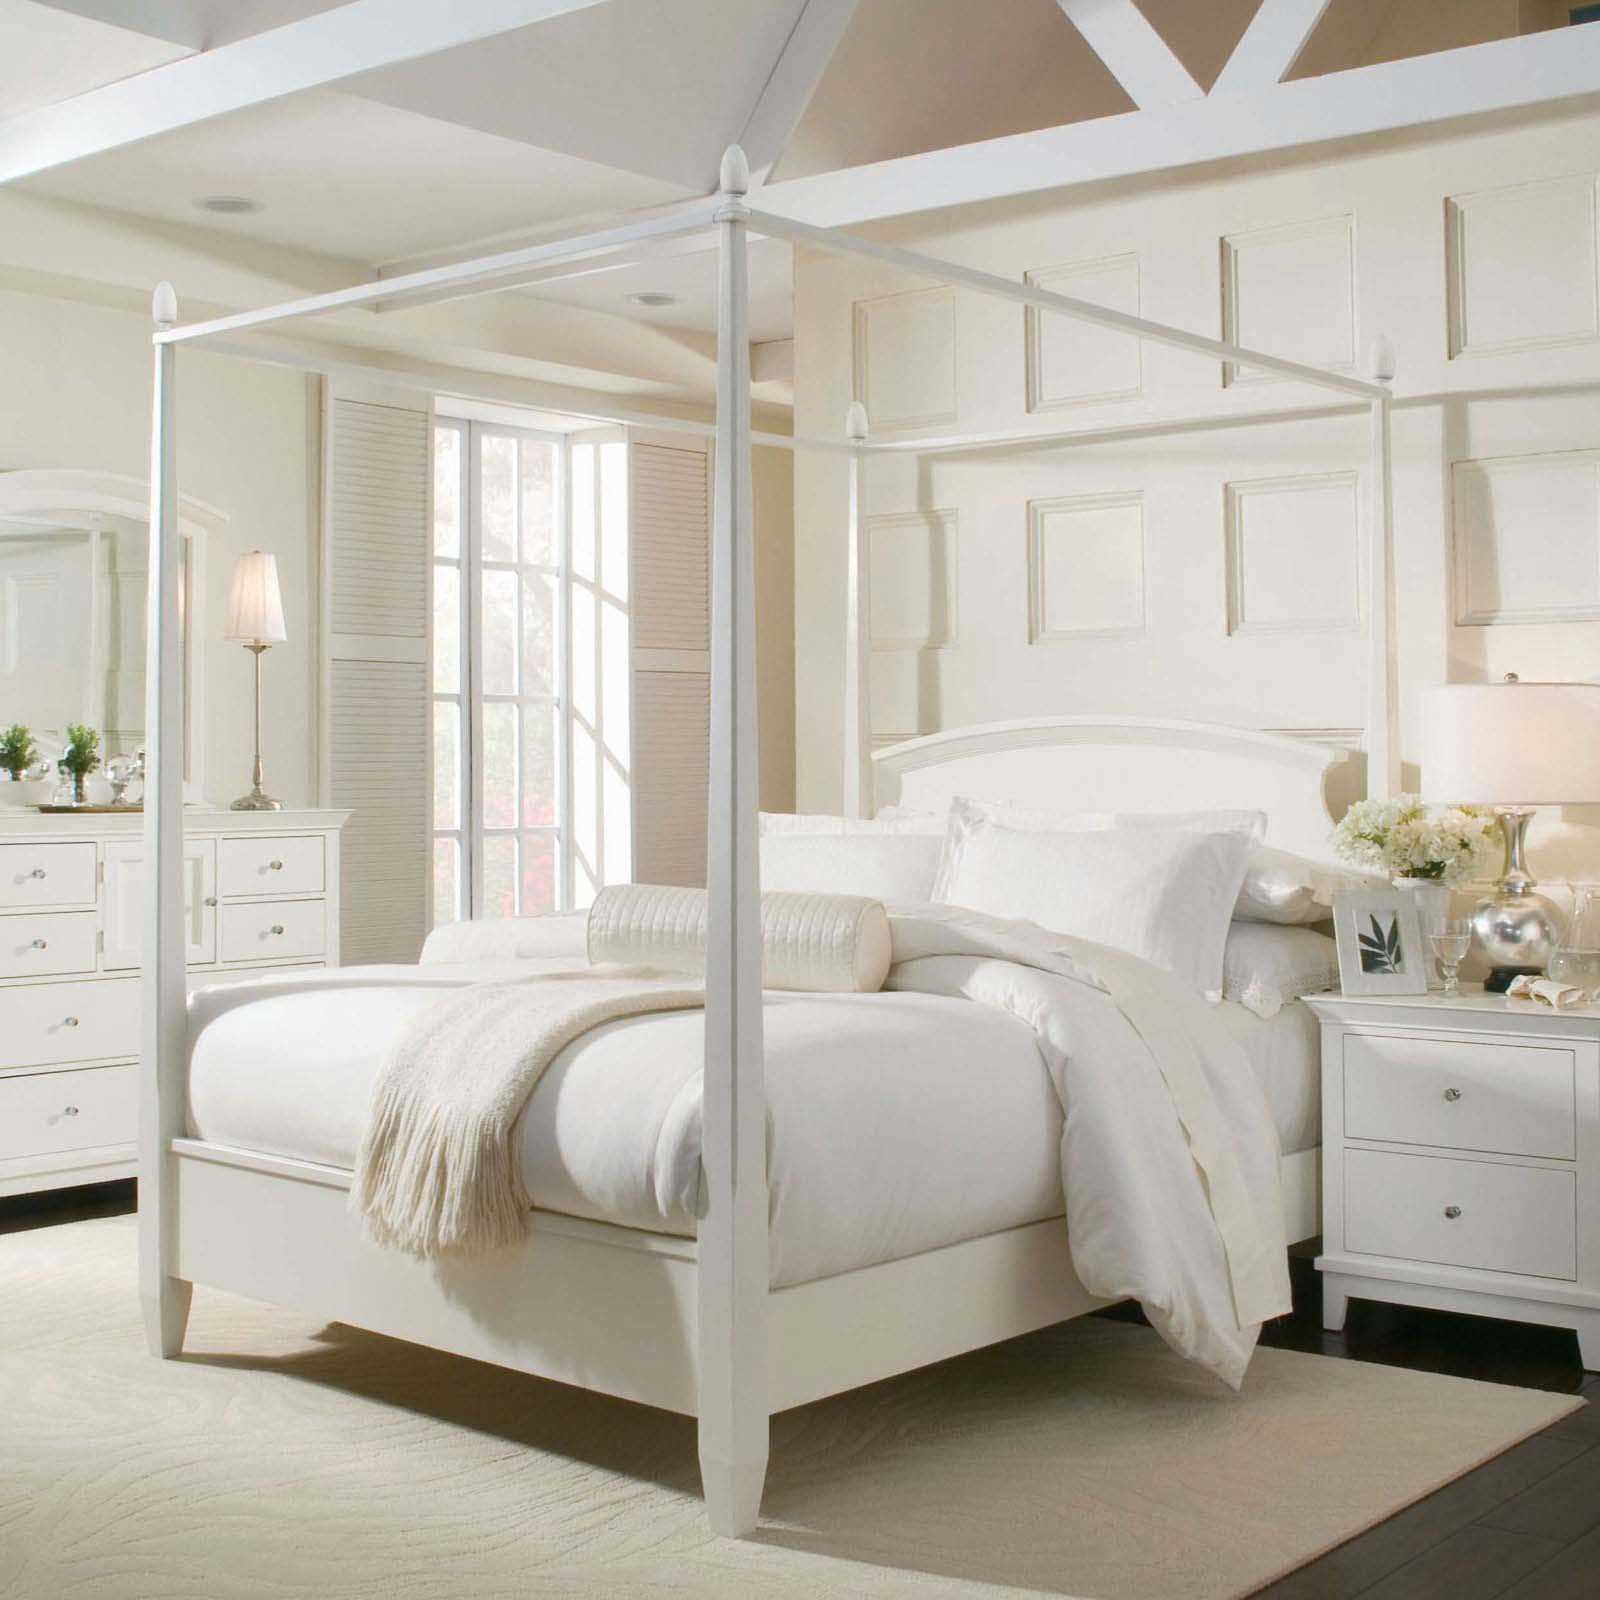 the idea of ​​a beautiful white bedroom style